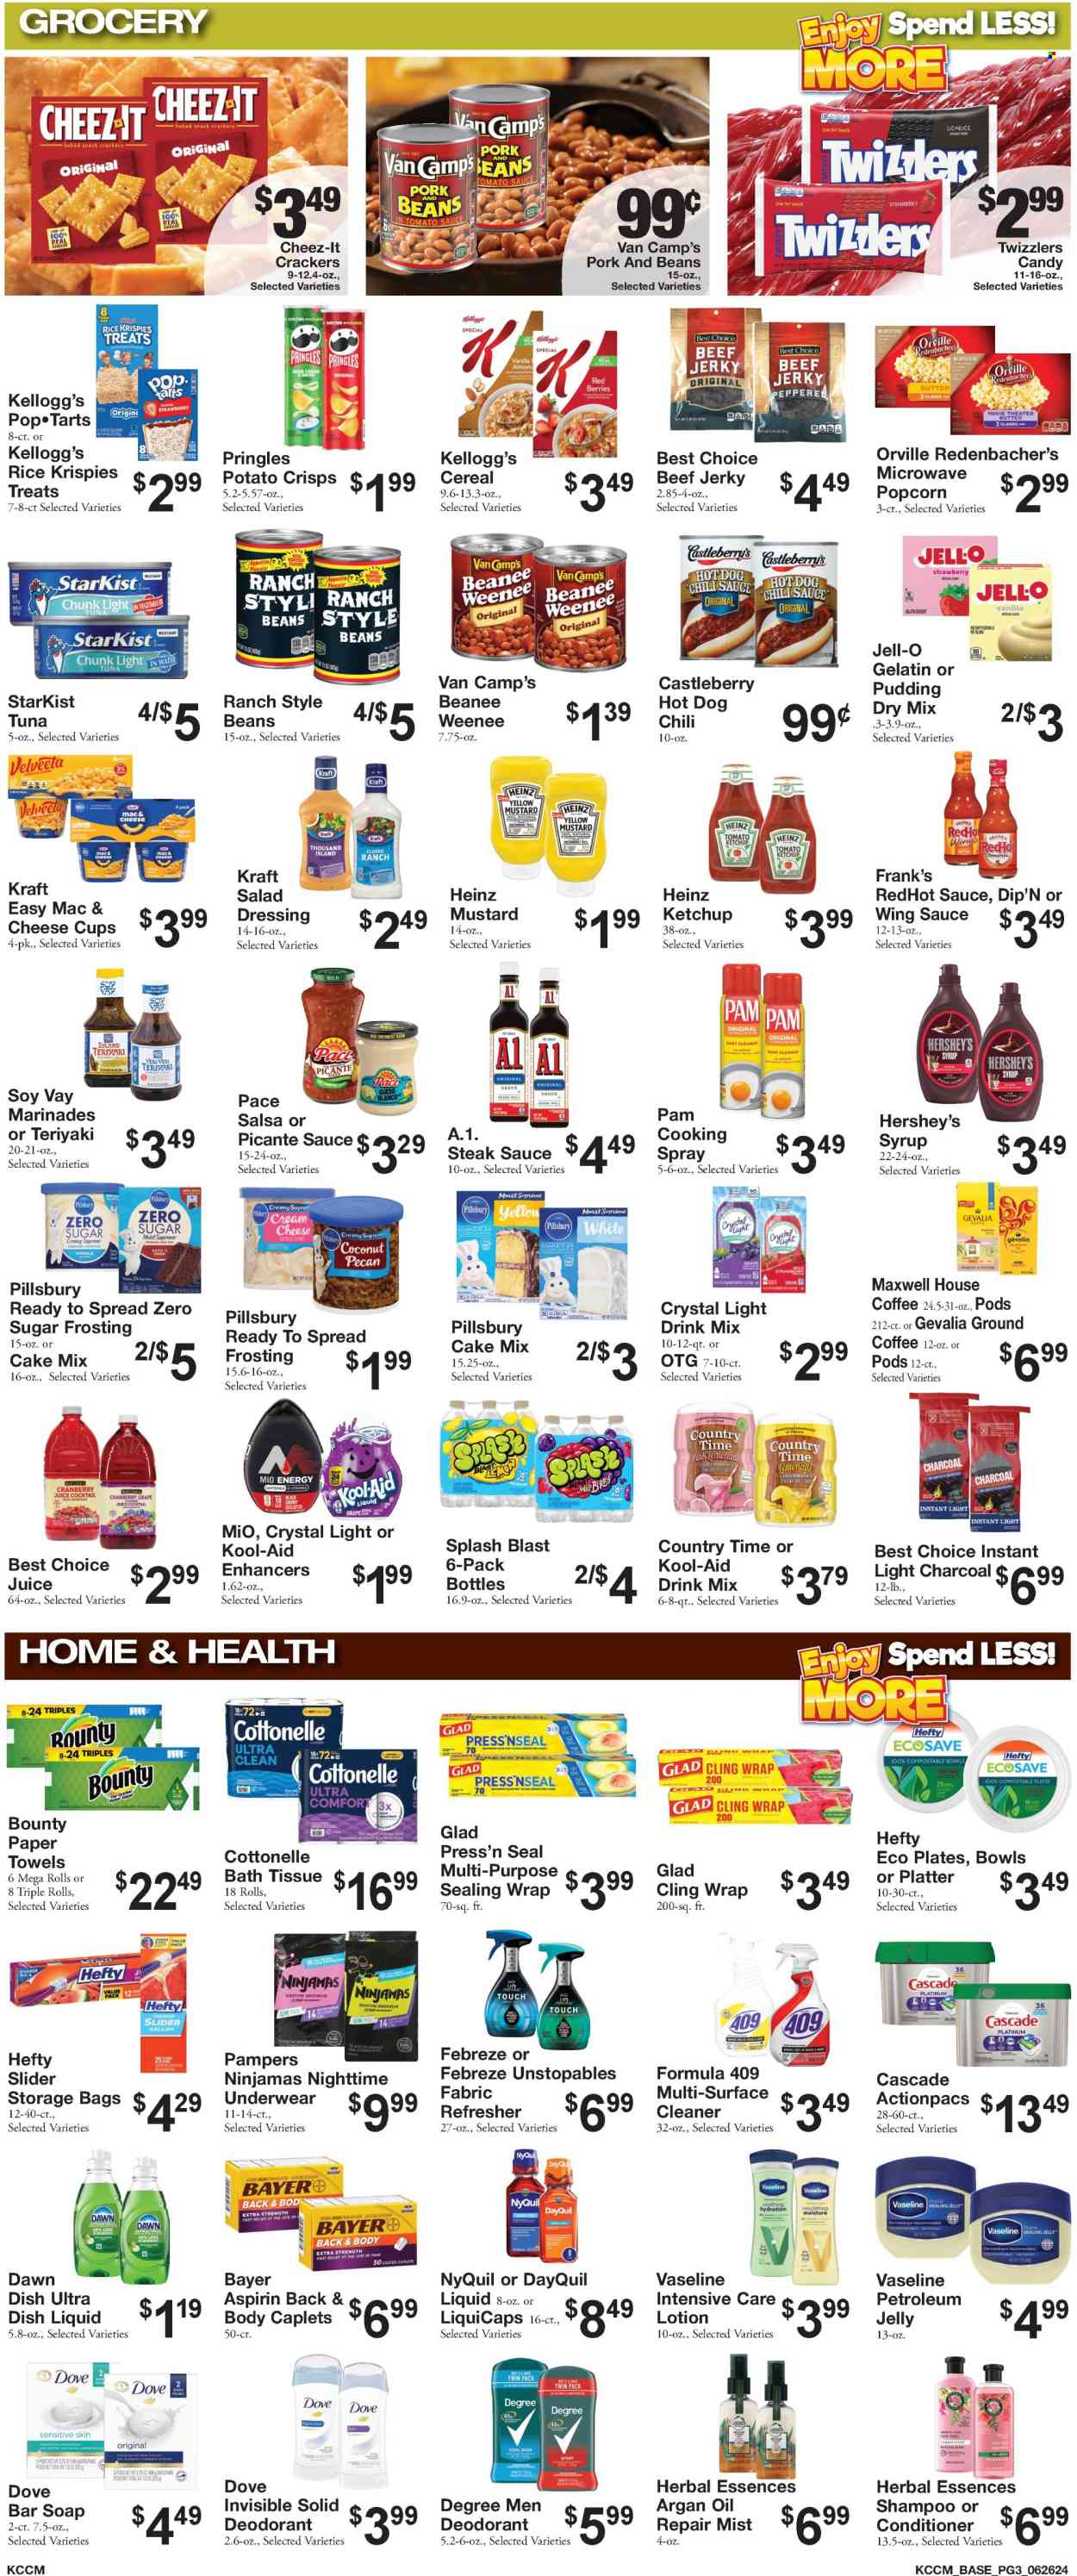 thumbnail - Bratchers Market Flyer - 06/26/2024 - 07/09/2024 - Sales products - cupcake, dessert, cake mix, tuna, StarKist, macaroni & cheese, hot dog, Pillsbury, Kraft®, ready meal, beef jerky, jerky, Velveeta, pudding, snack bar, Thousand Island dressing, Dove, Hershey's, Bounty, crackers, Kellogg's, Candy, sweets, potato crisps, Pringles, chips, popcorn, Cheez-It, salty snack, crisps, frosting, Jell-O, baking mix, canned tuna, Heinz, light tuna, canned fish, cereals, mustard, salad dressing, steak sauce, ketchup, chilli sauce, dressing, salsa, marinade, wing sauce, cooking spray, syrup, cranberry juice, lemonade, fruit drink, Country Time, electrolyte drink, powder drink, Maxwell House, coffee, ground coffee, Gevalia, Pampers, nappies, baby pants, petroleum jelly, bath tissue, Cottonelle, kitchen towels, paper towels, Febreze, surface cleaner, cleaner, all purpose cleaner, Cascade, Unstopables, fabric refresher, dishwashing liquid, dishwasher tablets, shampoo, Vaseline, soap bar, soap, hair products, conditioner, refresher, Herbal Essences, body lotion, deodorant, Degree, Hefty, storage bag, clingwrap, charcoal, DayQuil, Cold & Flu, NyQuil, aspirin, Bayer, dietary supplement, vitamins. Page 3.